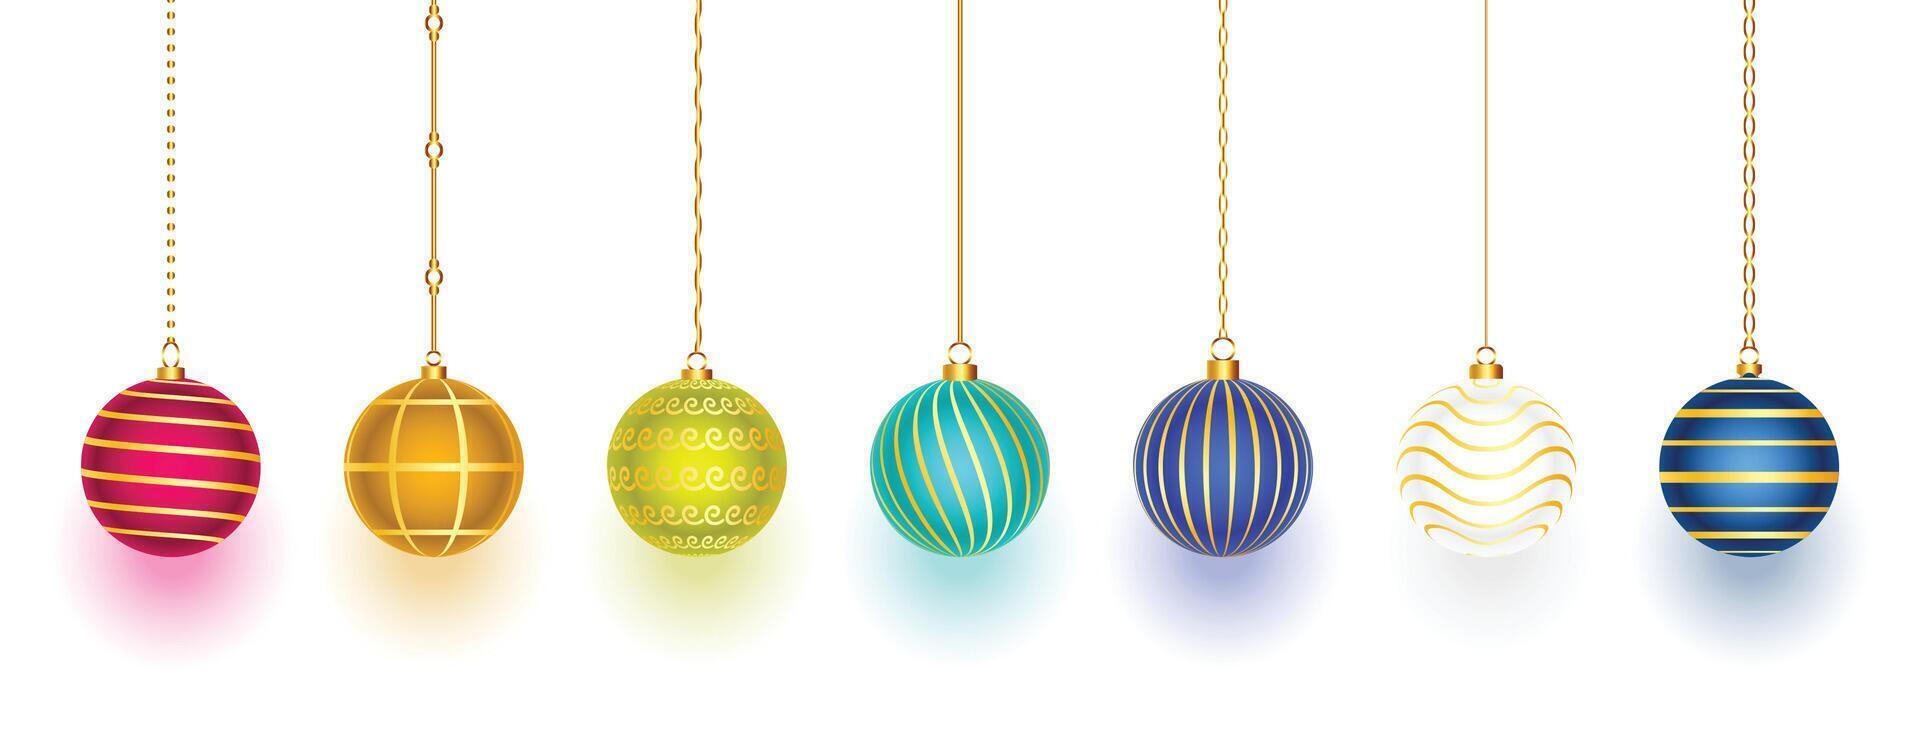 collection of 3d bauble elements design for christmas decoration vector